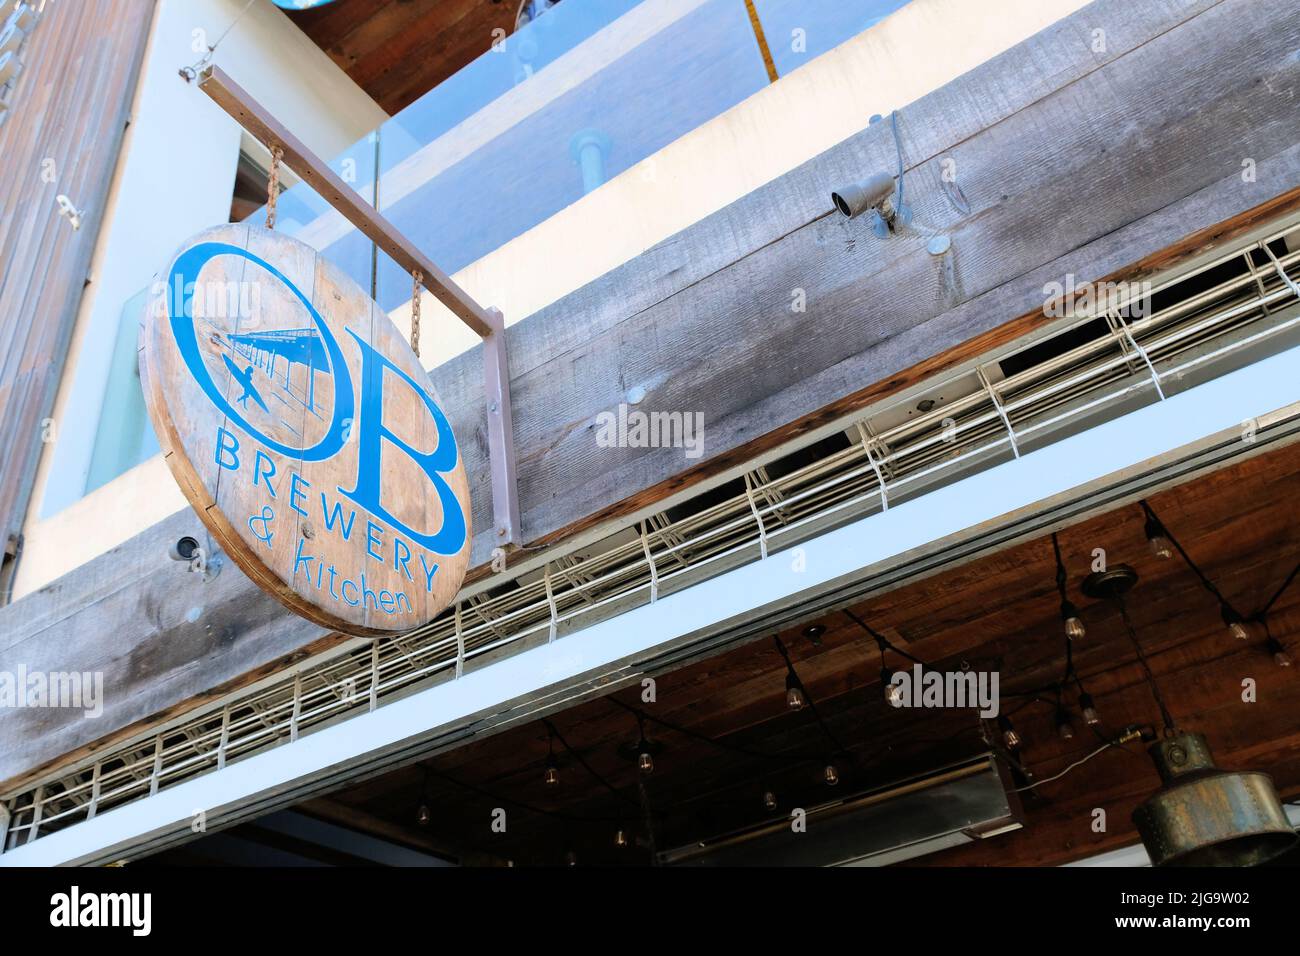 OB Brewery and Kitchen, San Diego, California’s first micro brewery in the Ocean Beach; craft beer and dining for locals, visitors, and tourists. Stock Photo